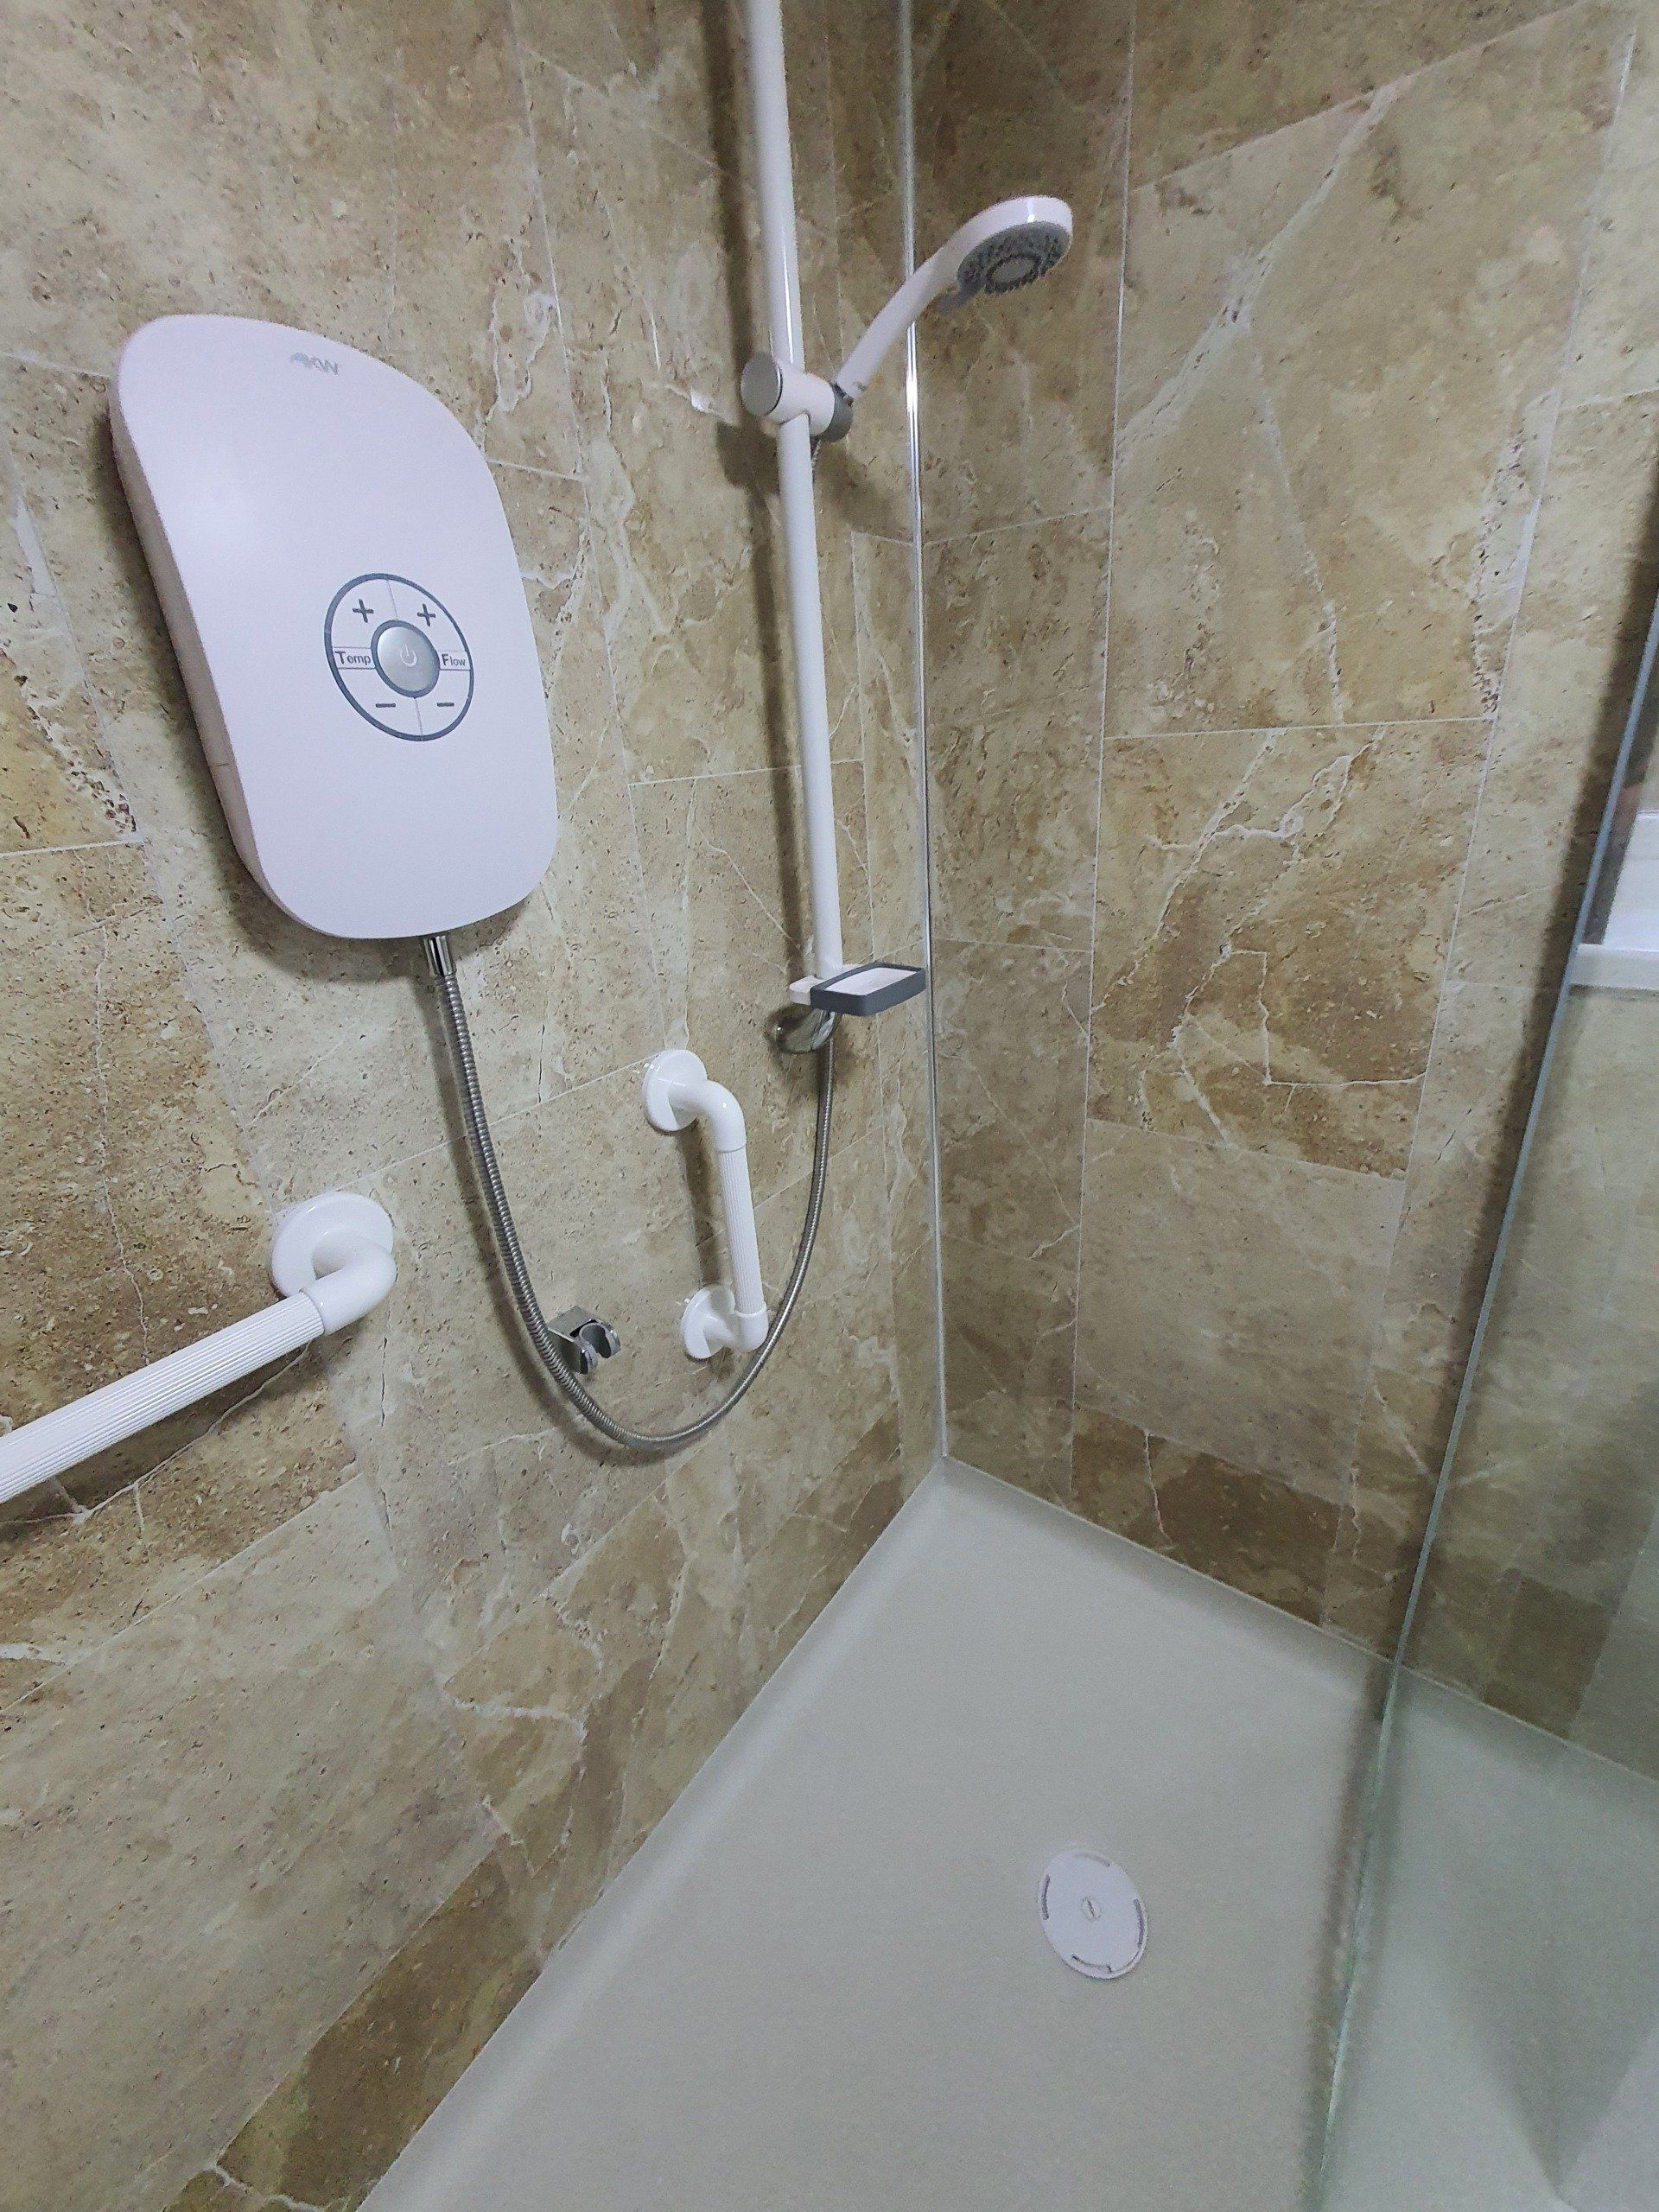 after accessible shower installation